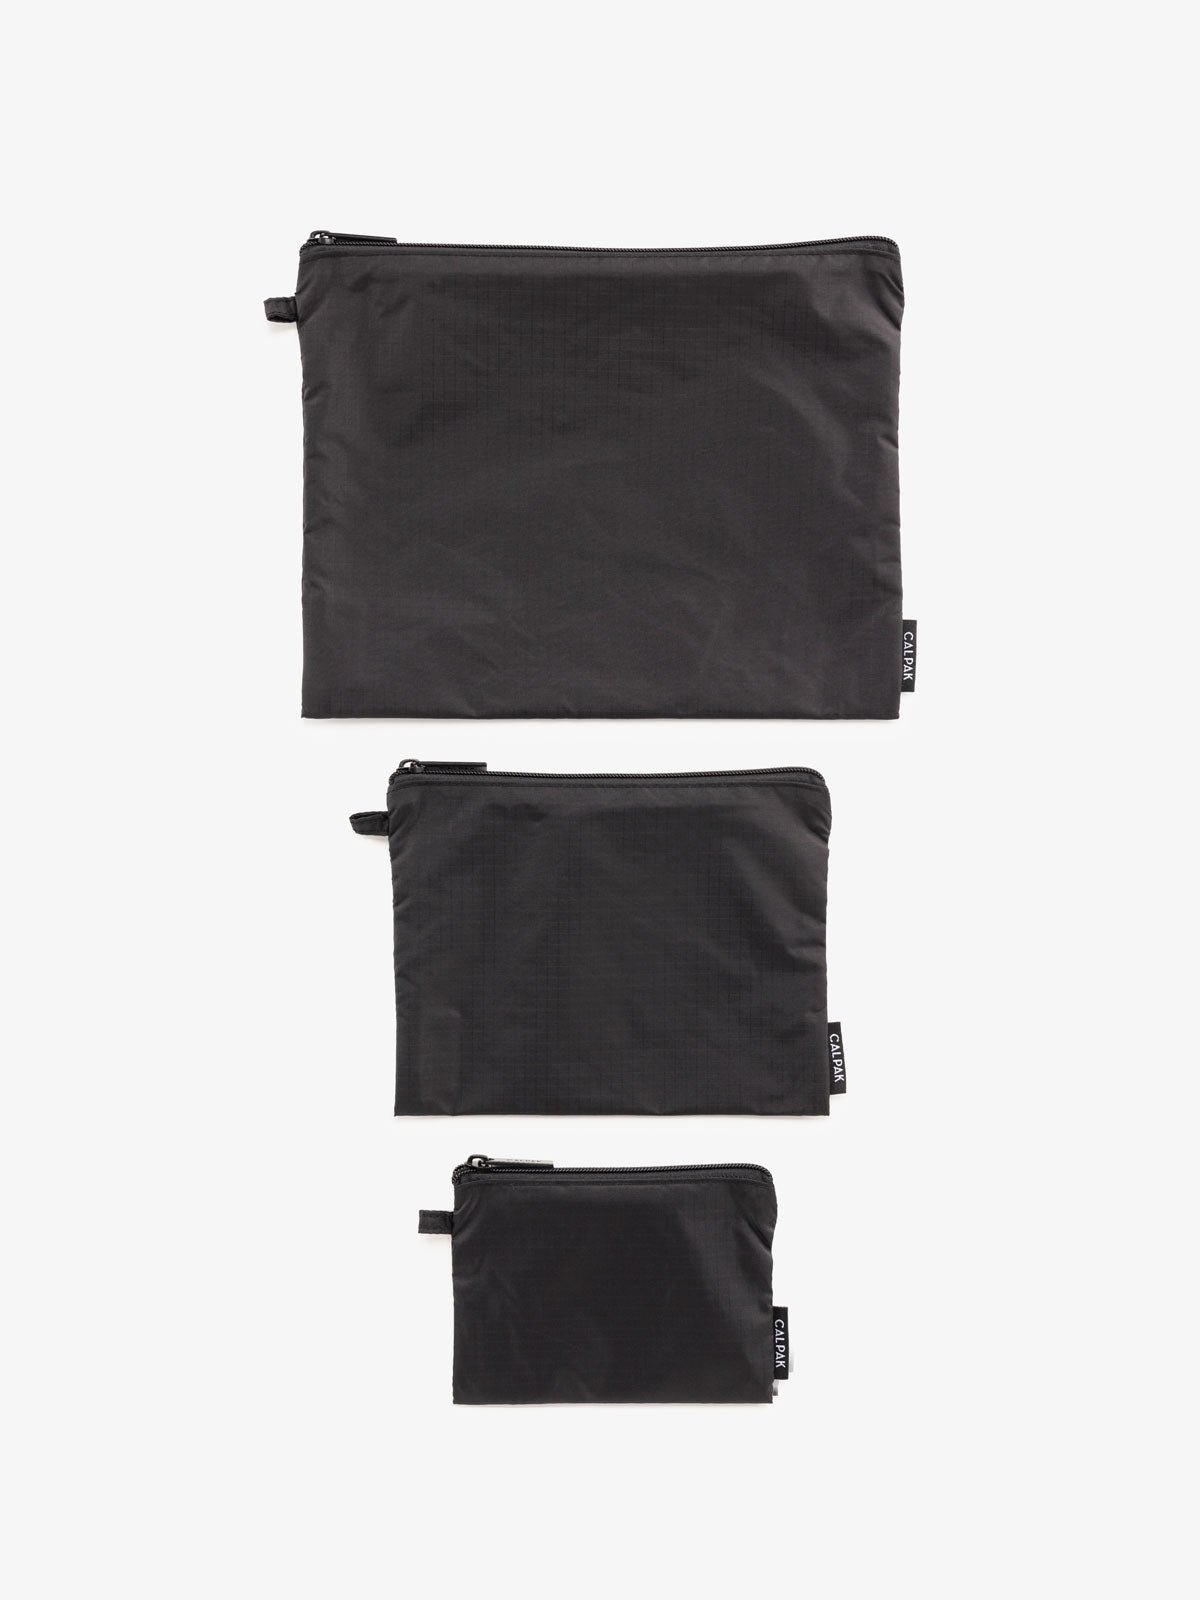 CALPAK set of pouches for organization in black